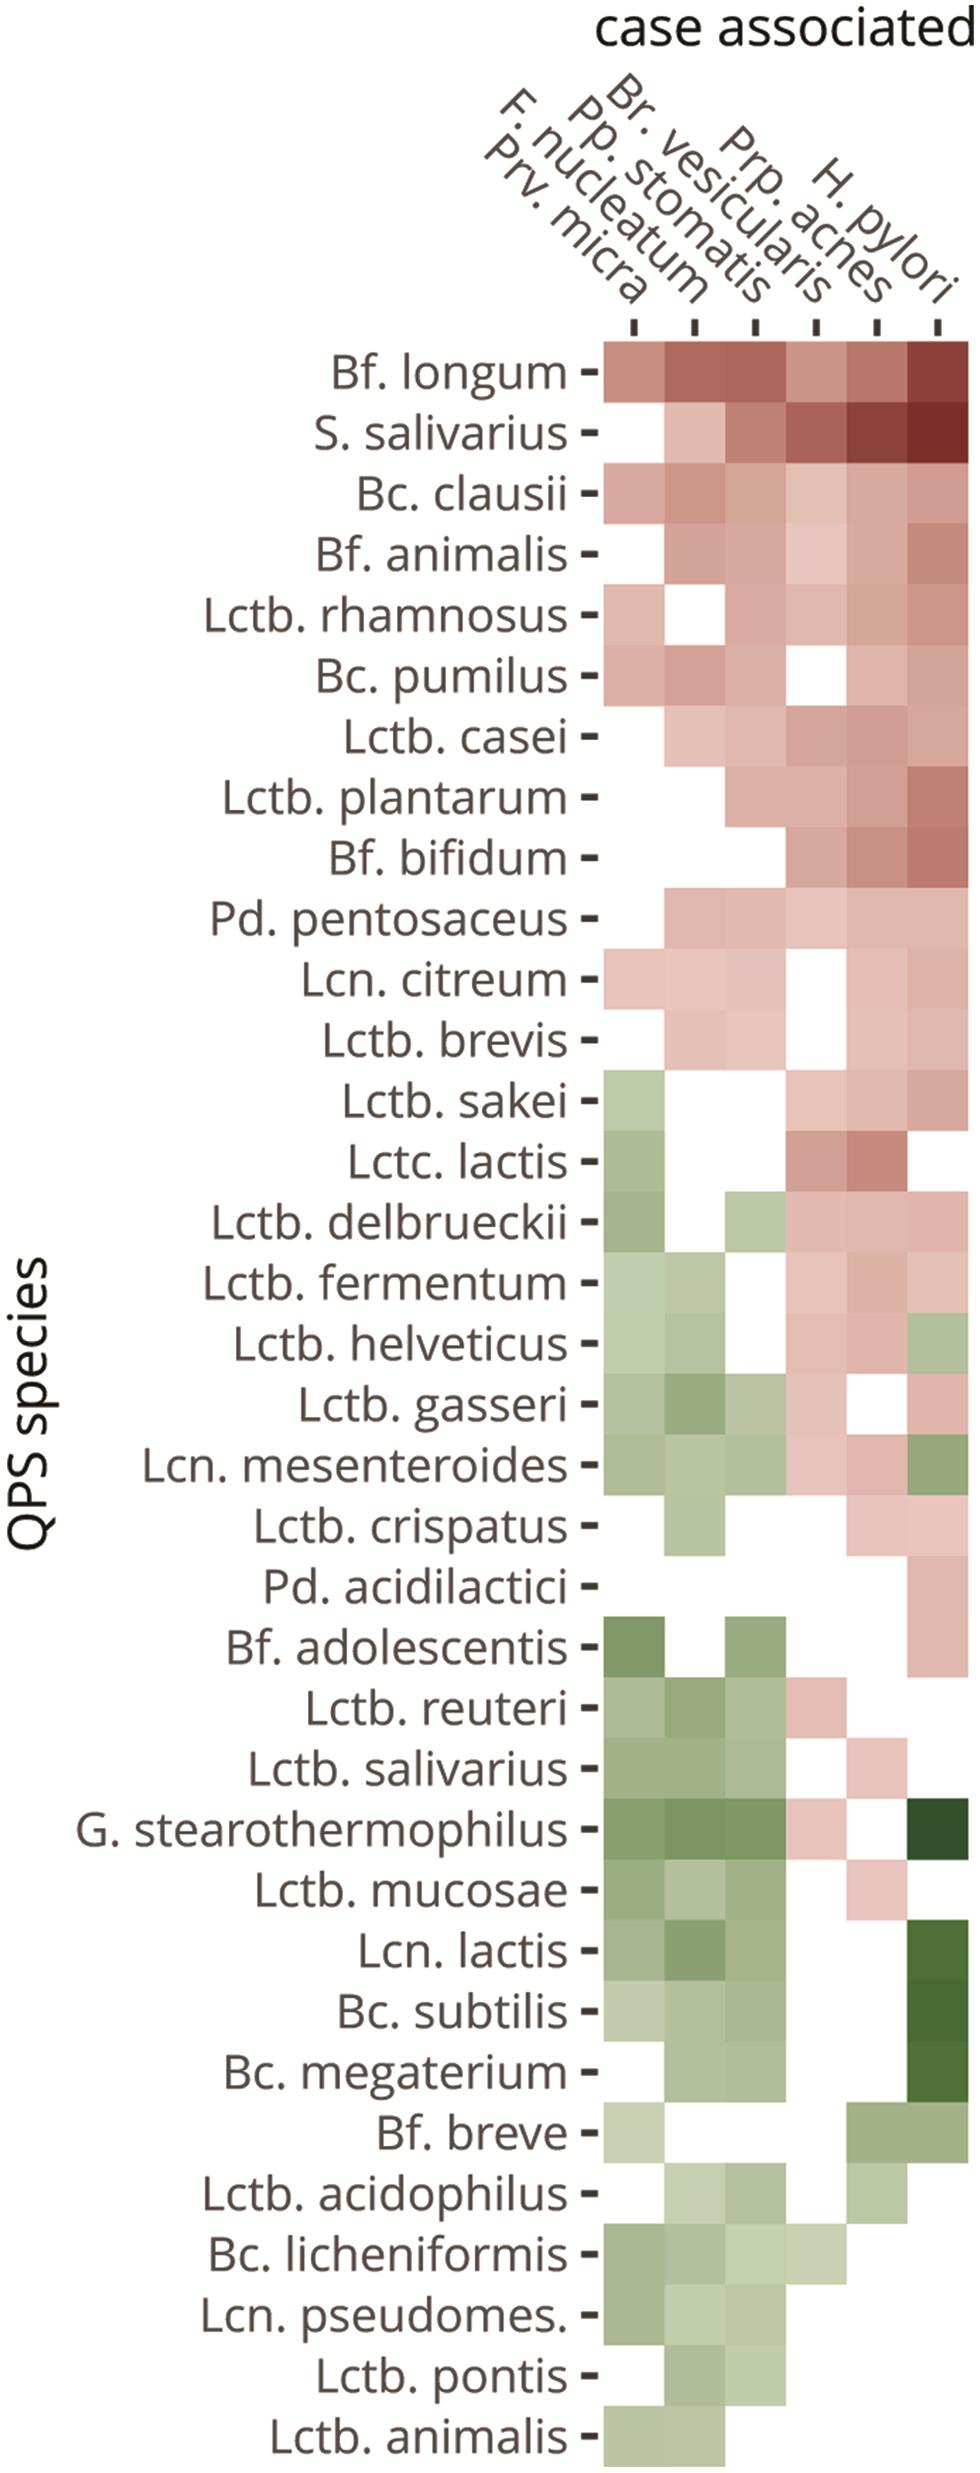 Co-exclusion by and co-occurrence with QPS species of gastric cancer-associated species.